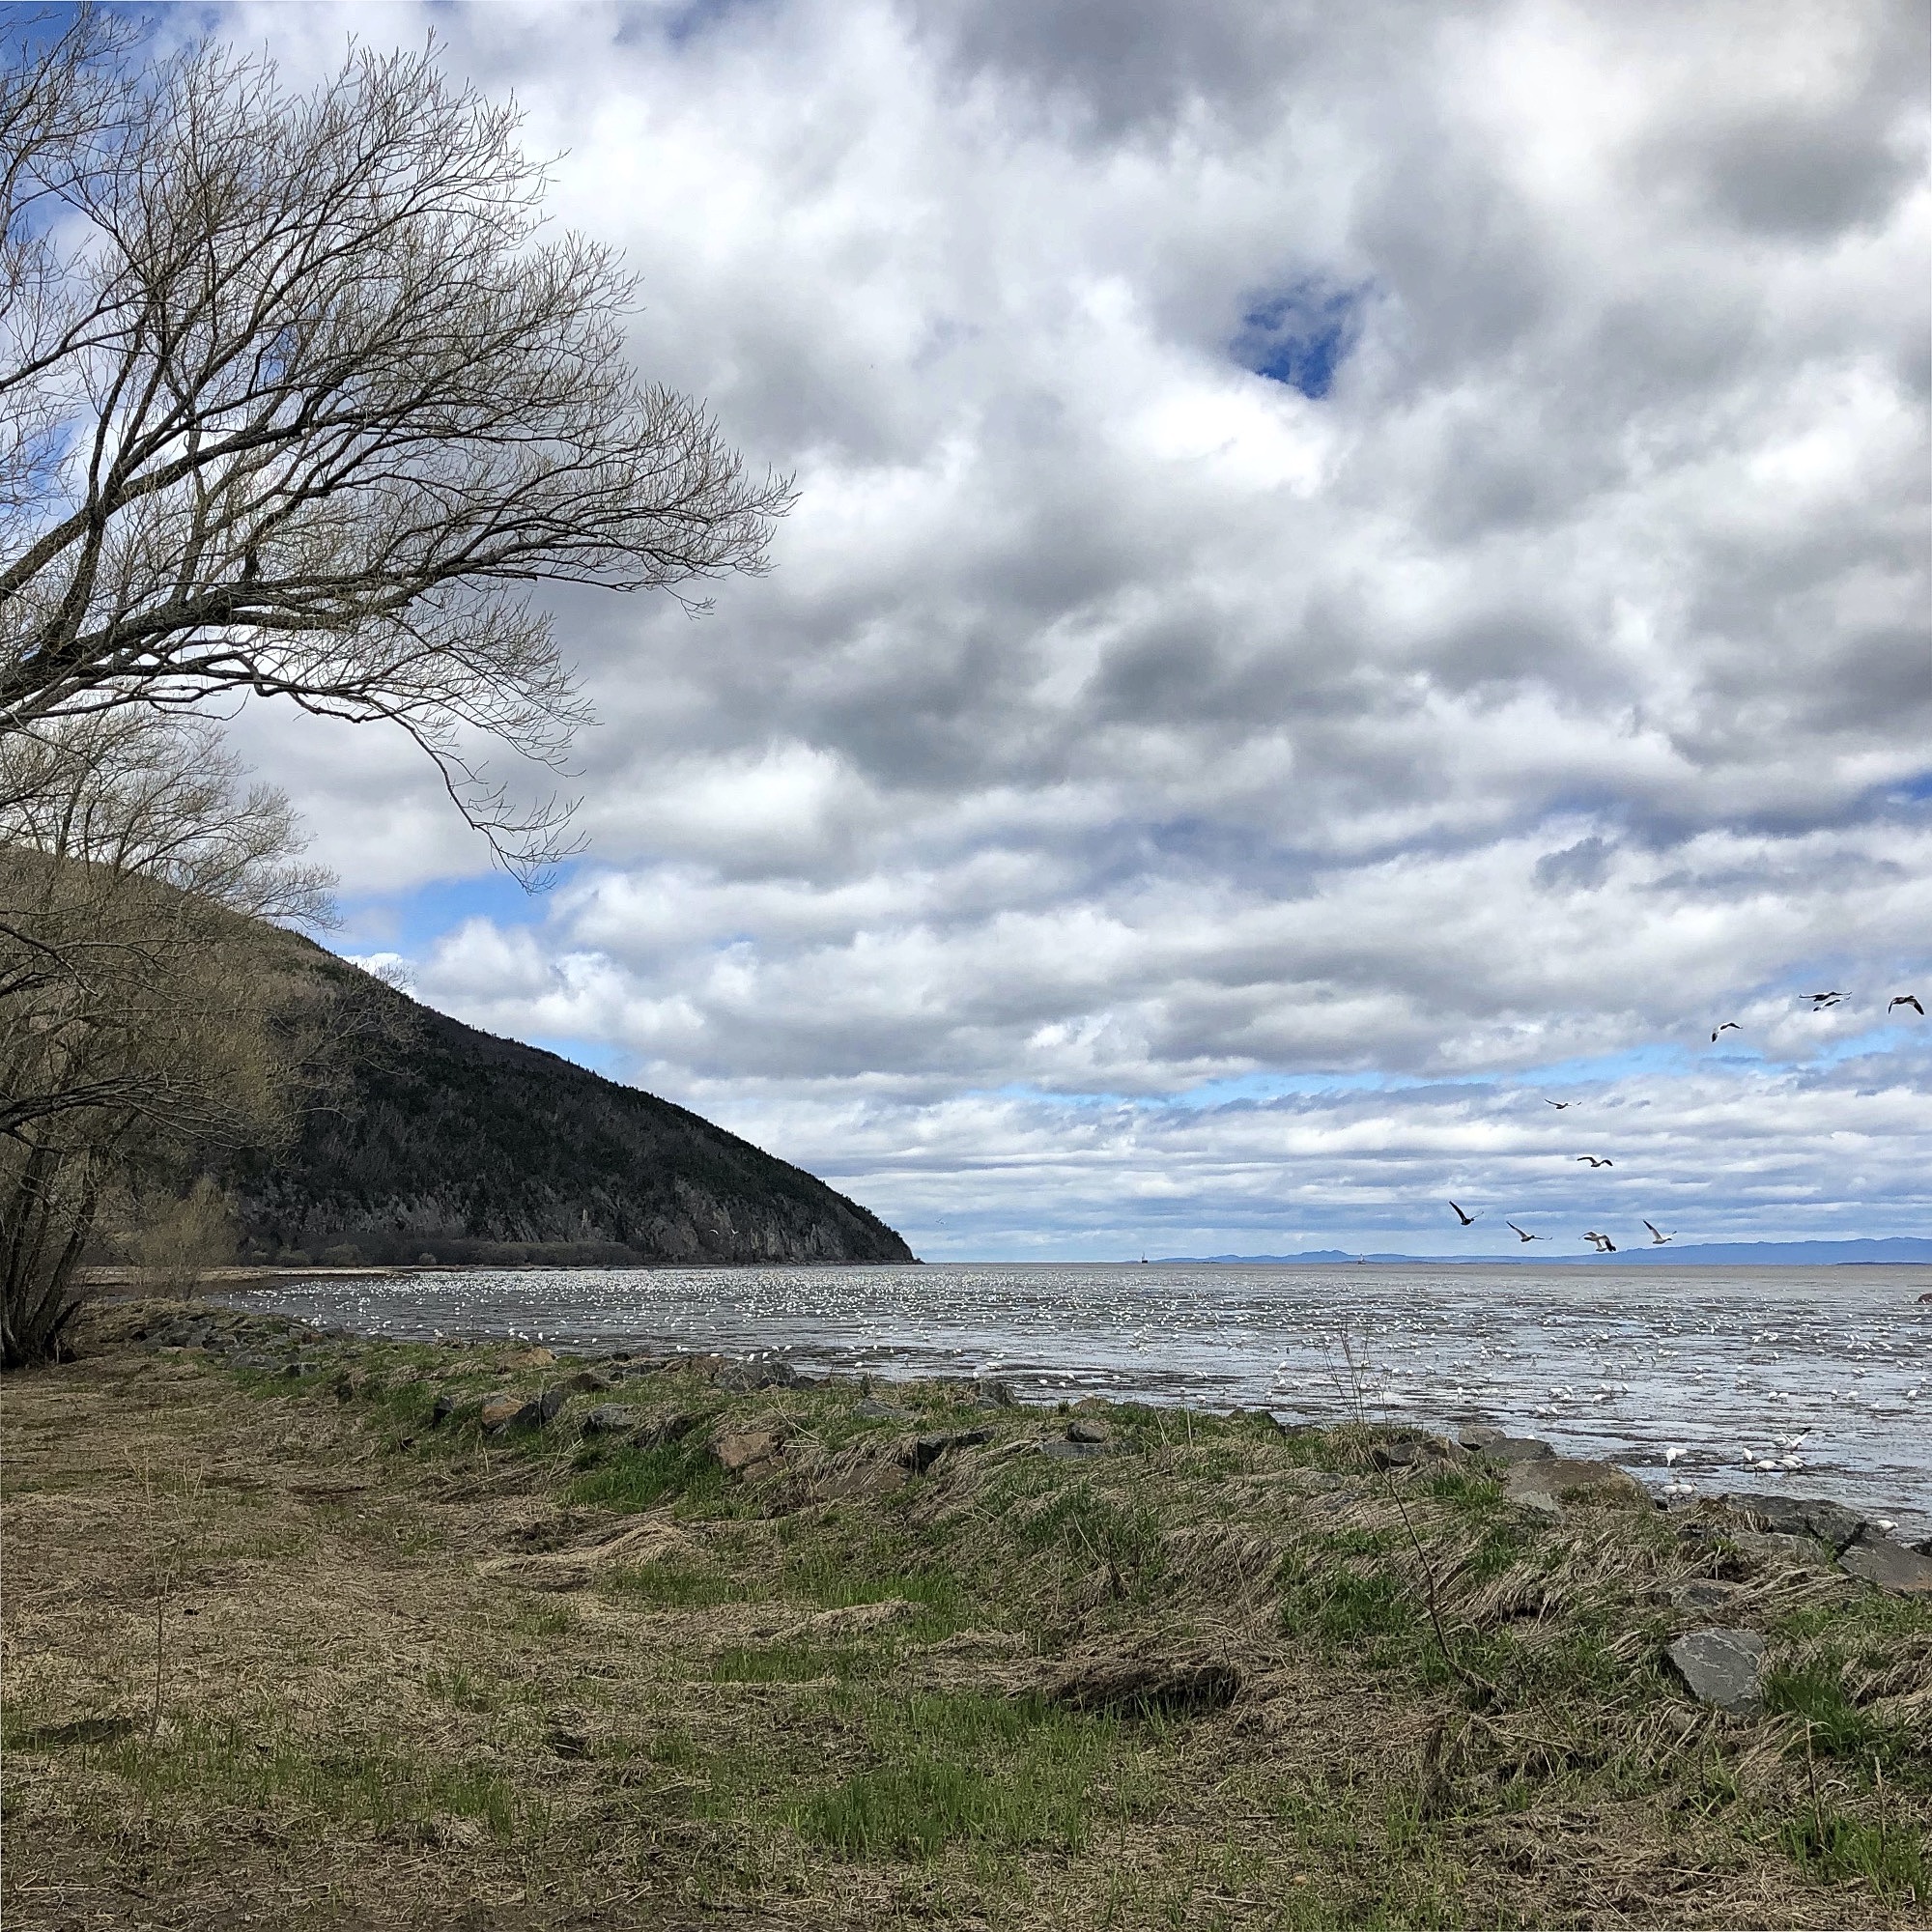 Shores of the Saint-Lawrence river near La Malbaie, cloudy sky